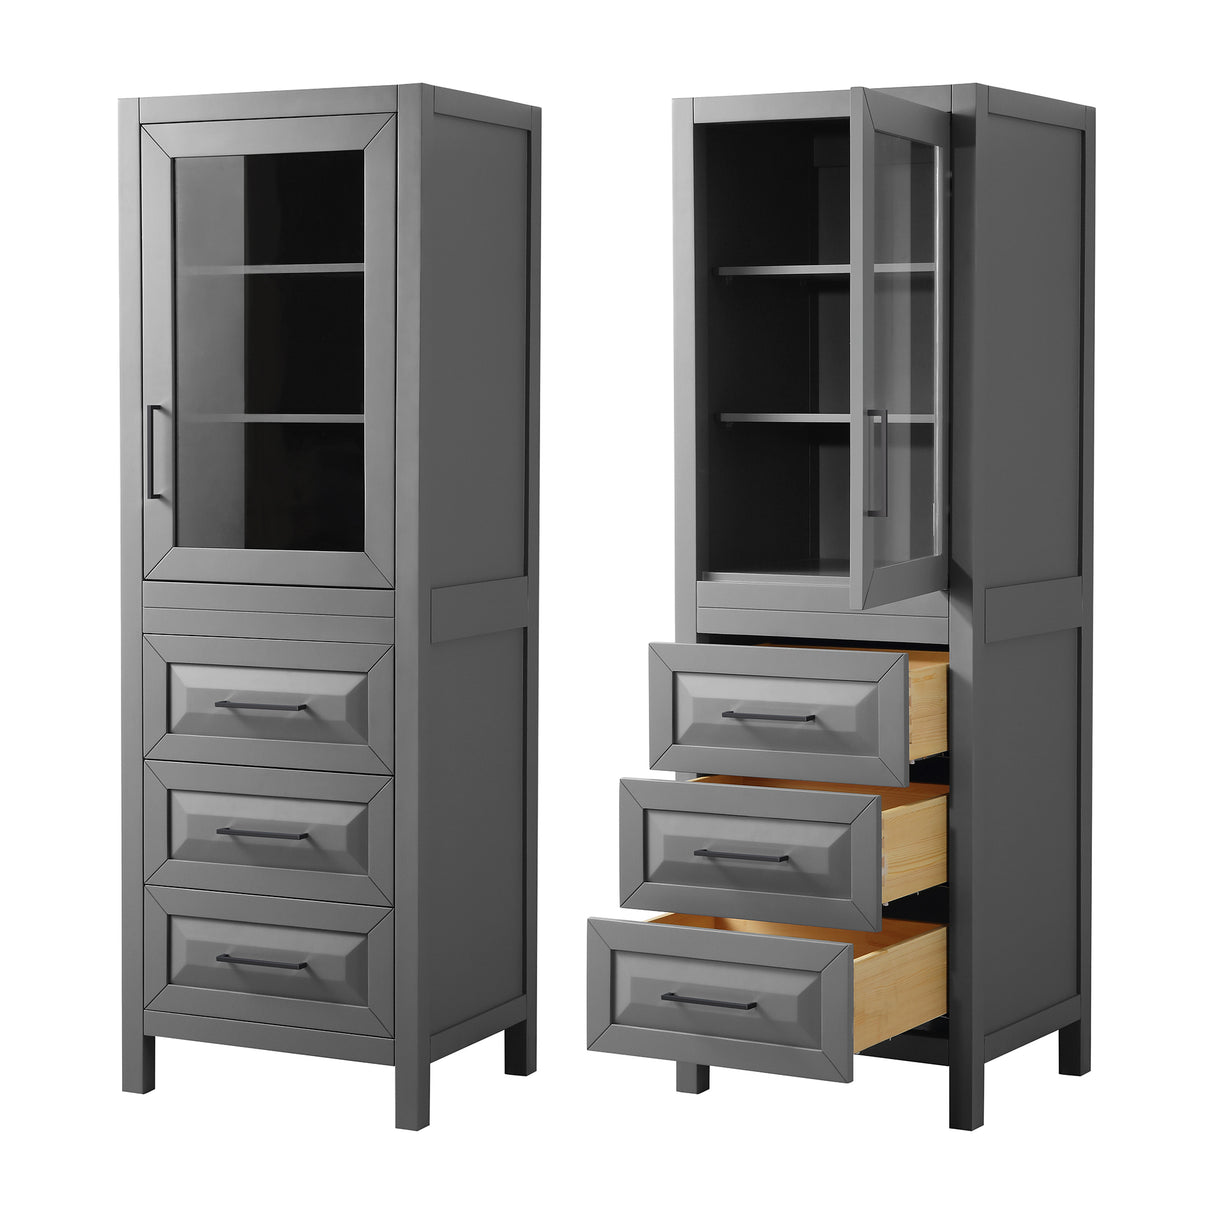 Daria Linen Tower in Dark Gray with Matte Black Trim Shelved Cabinet Storage and 3 Drawers